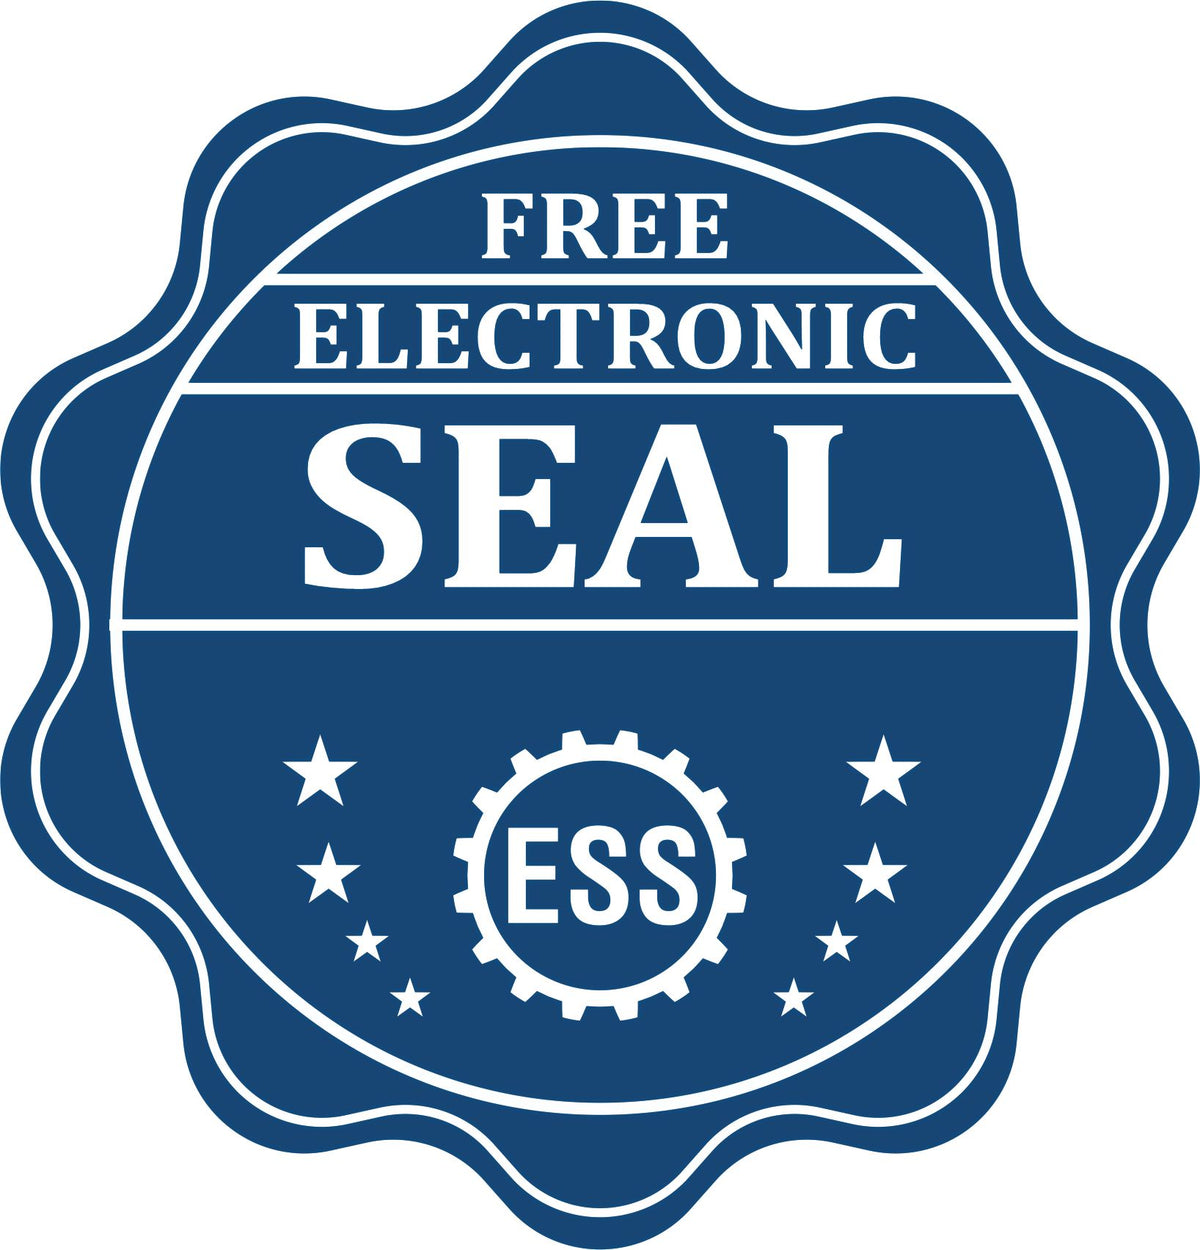 A badge showing a free electronic seal for the Indiana Desk Architect Embossing Seal with stars and the ESS gear on the emblem.